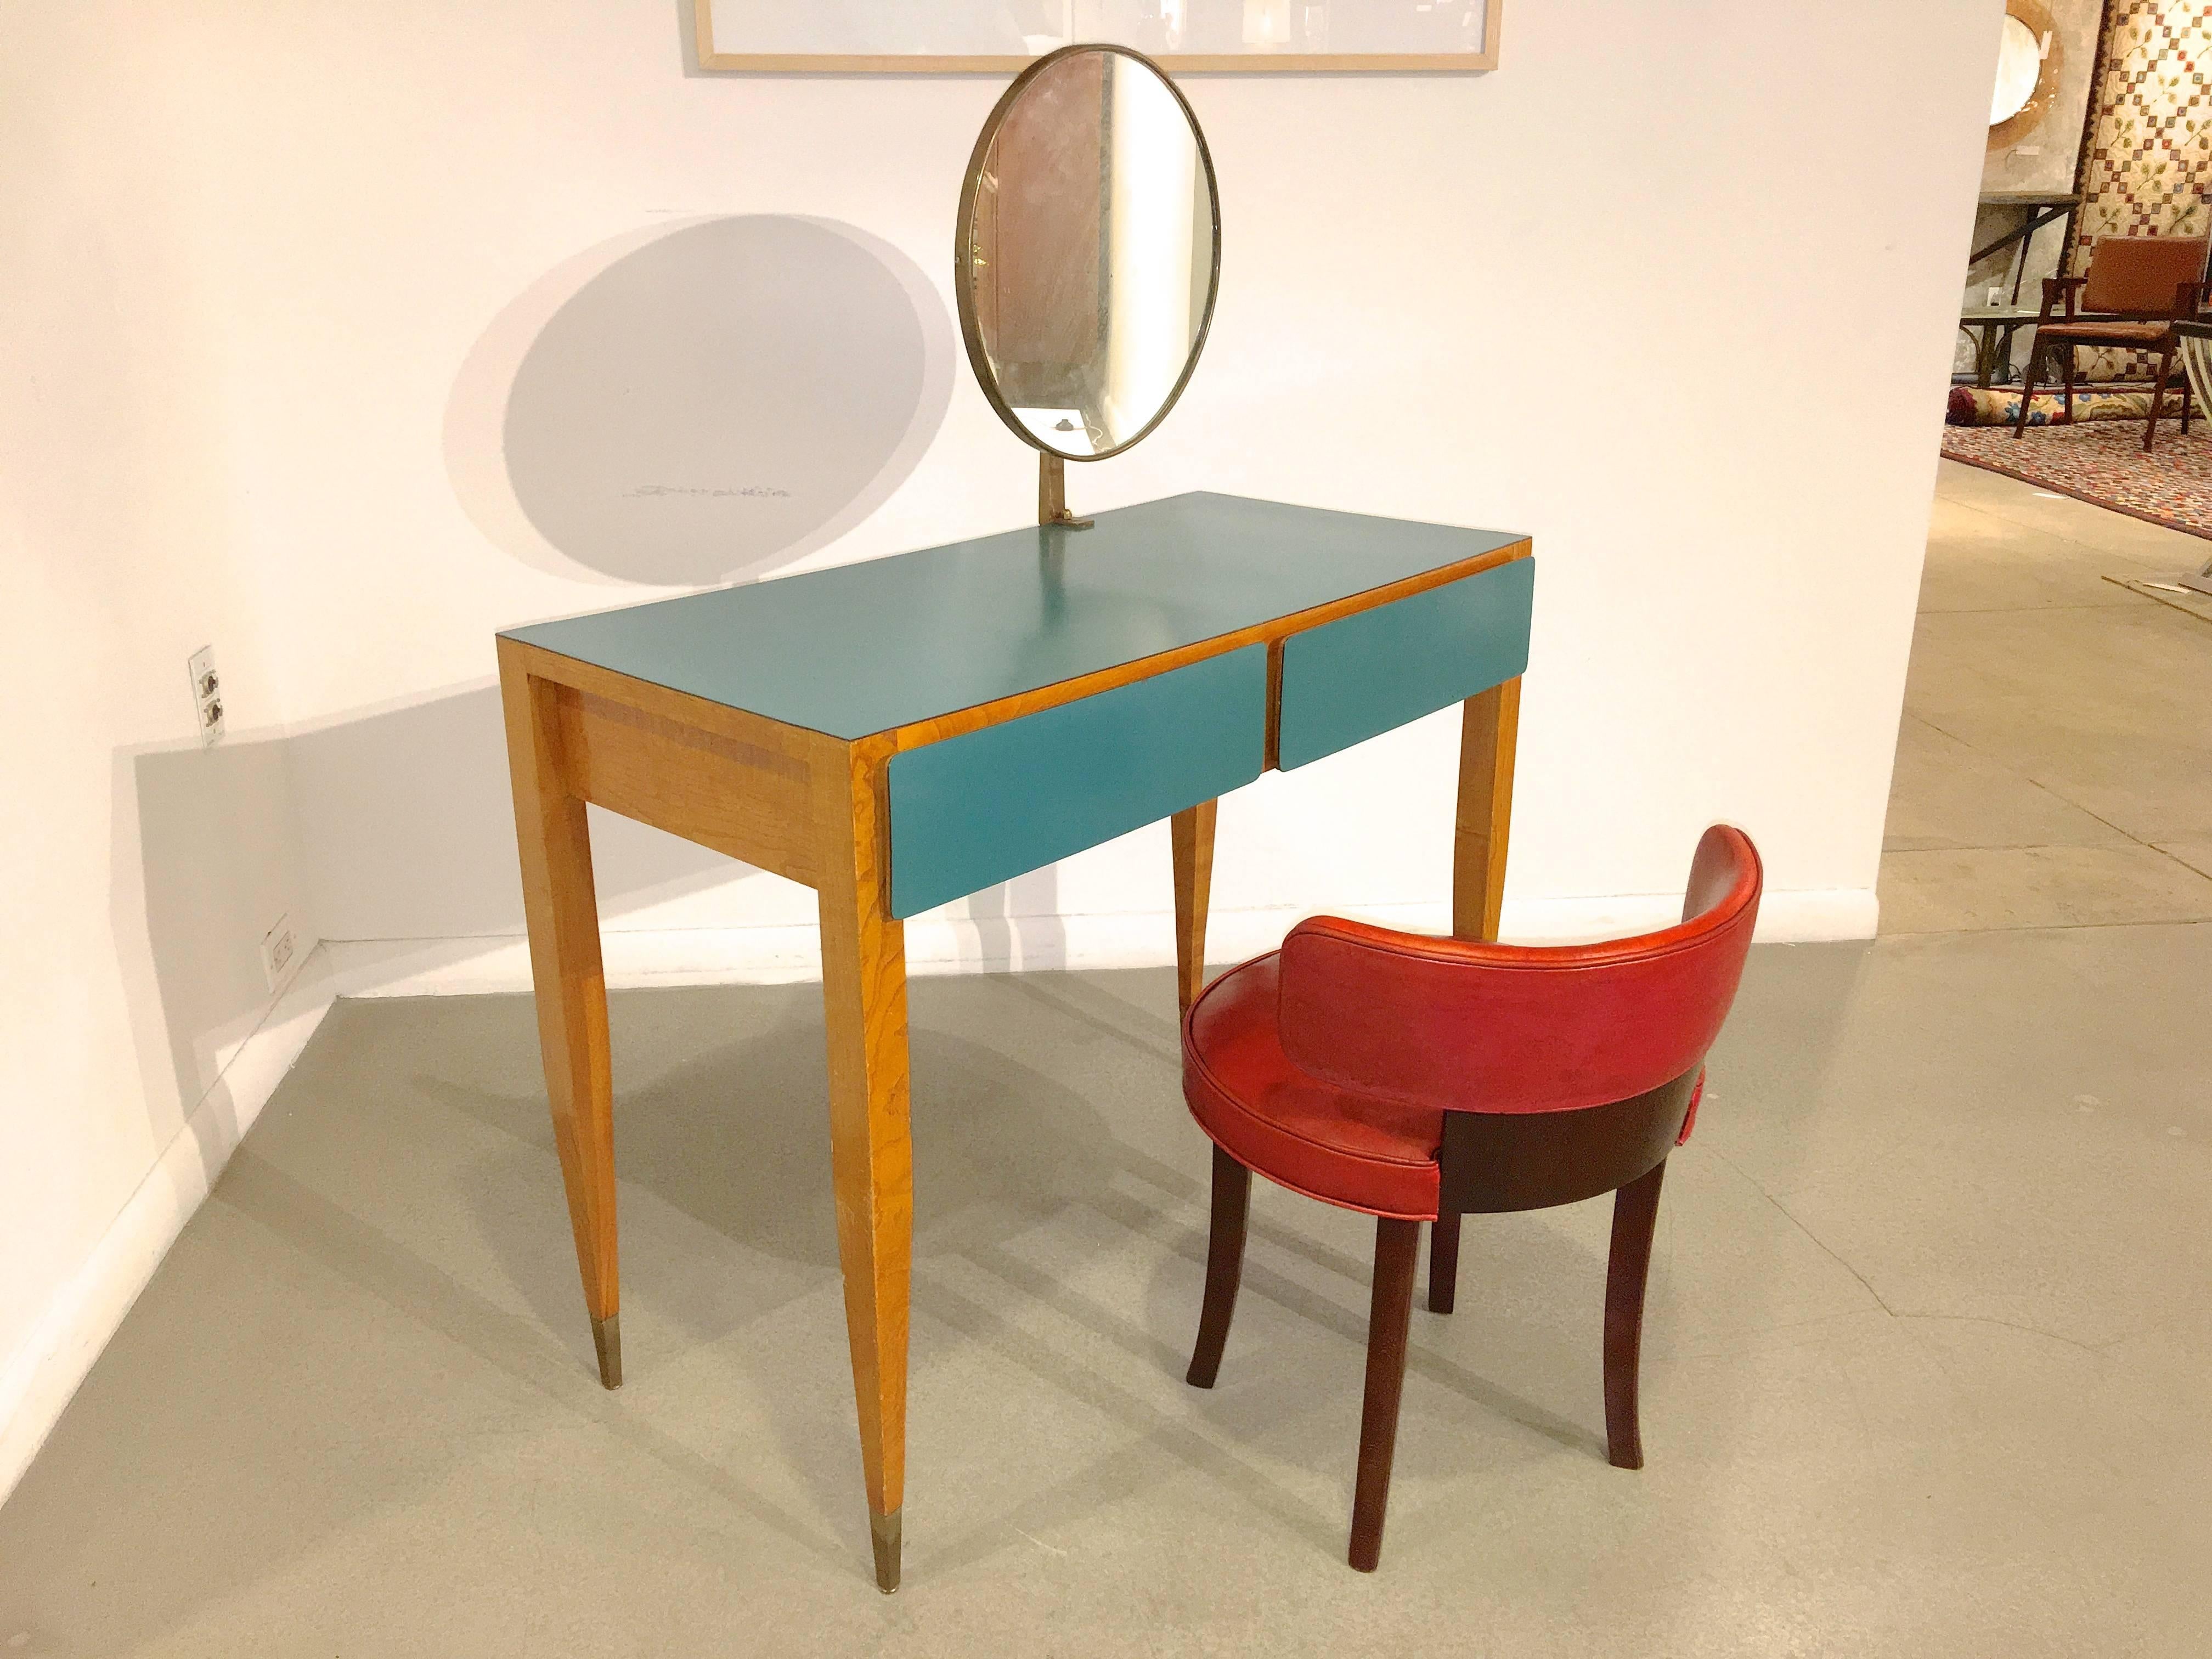 Vanity dressing table with adjustable gilt bronze framed Fontana Arte round mirror and brass sabots, by Gio Ponti from the Parco dei Principi Hotel, Rome, Italy, ca. 1964.
Inscribed in pencil to underside 'Camera 103' 
Manufacturer: Giordano Chiesa